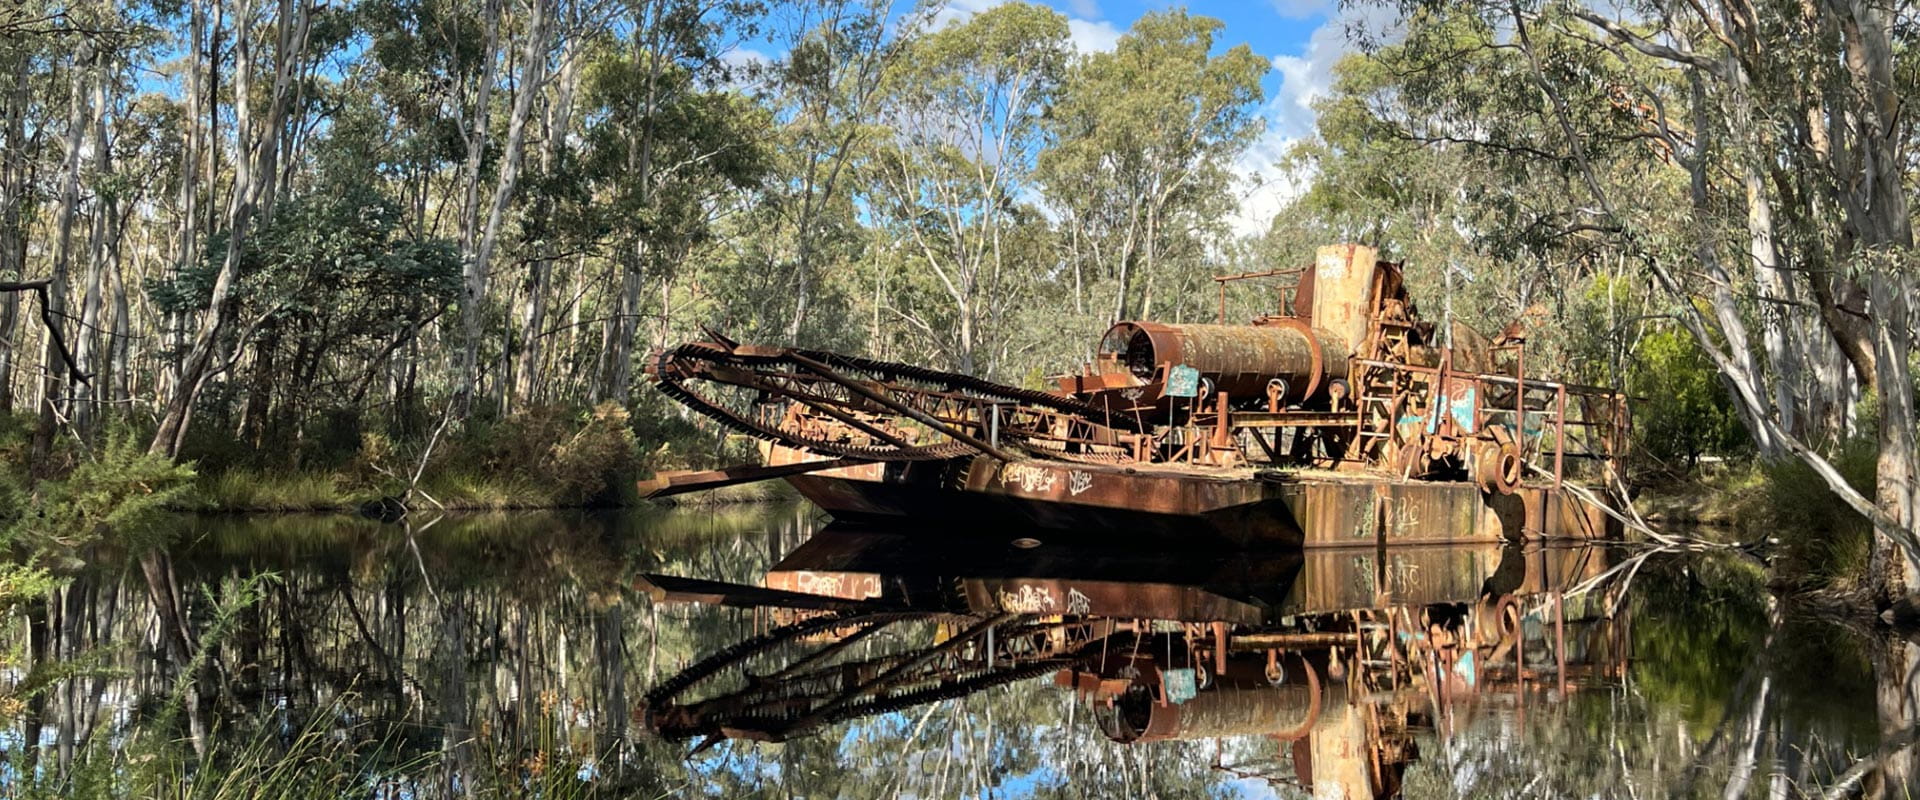 A rusted dredge floats on the river, a remnant of the area's past commercial operations.